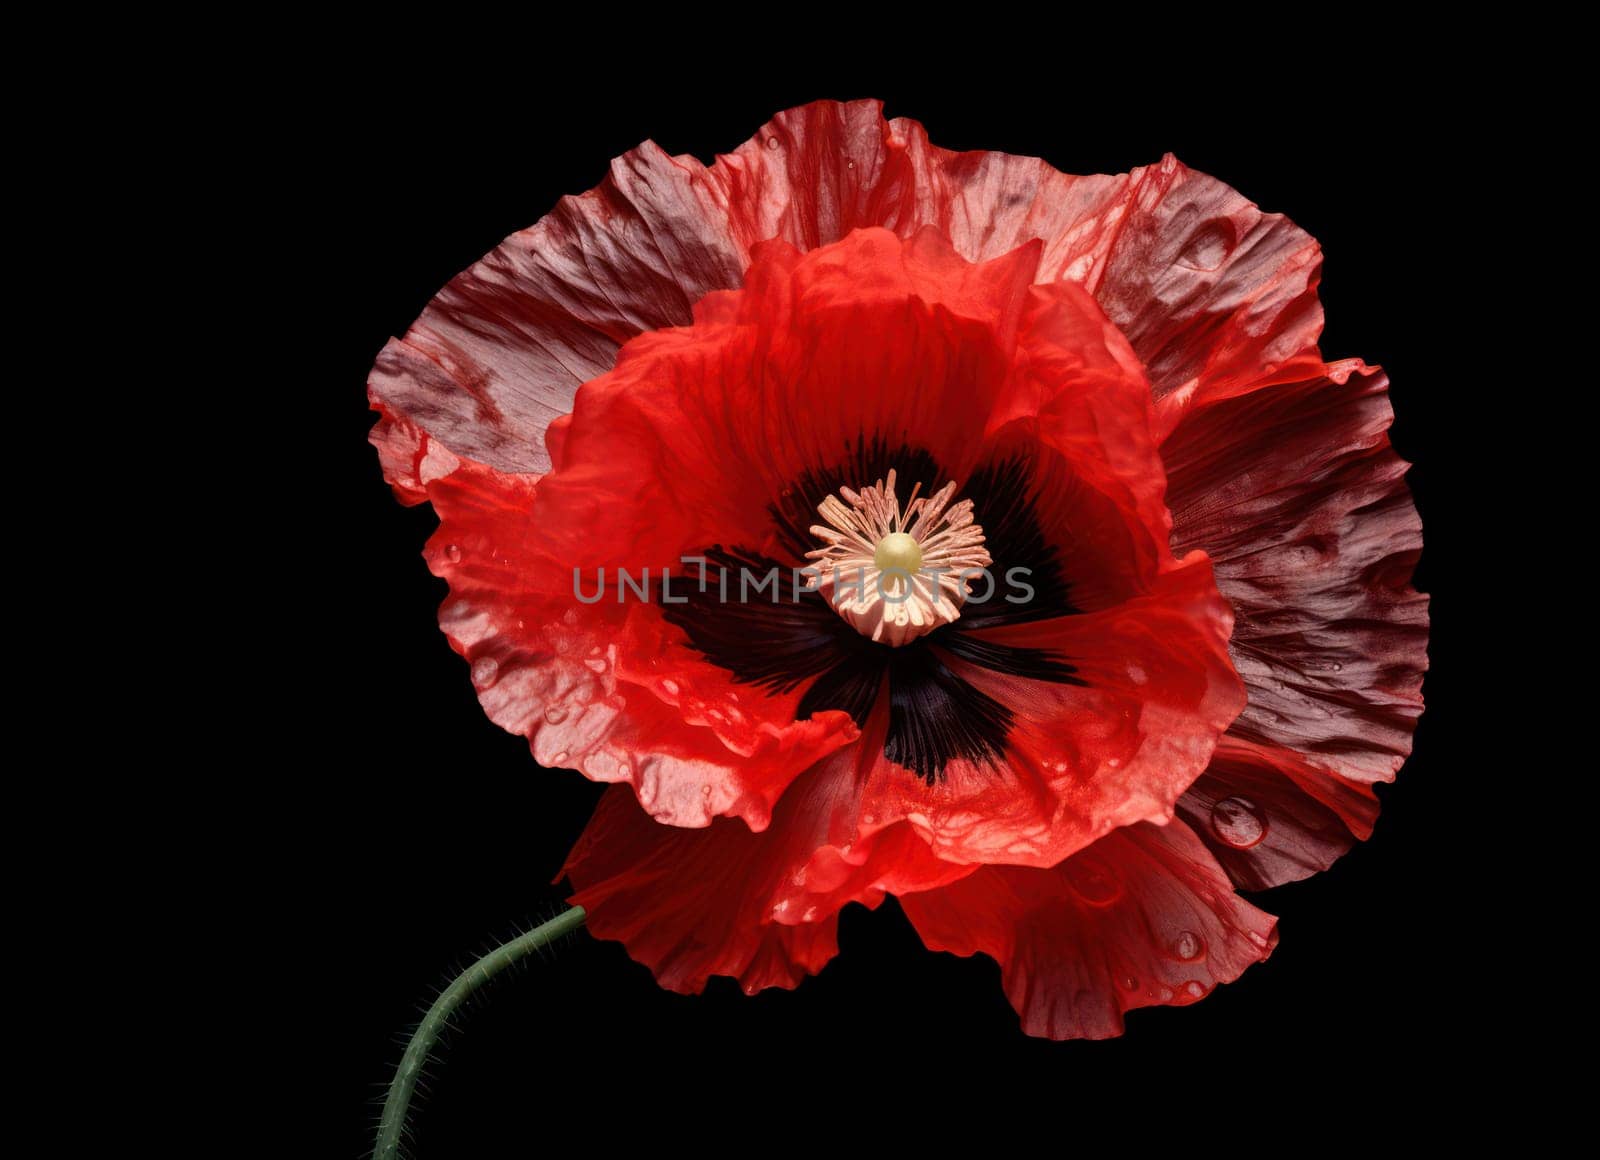 Red Poppy Blossom: Purity of Beauty and Fragility Captured in Nature's Colorful Meadow by Vichizh